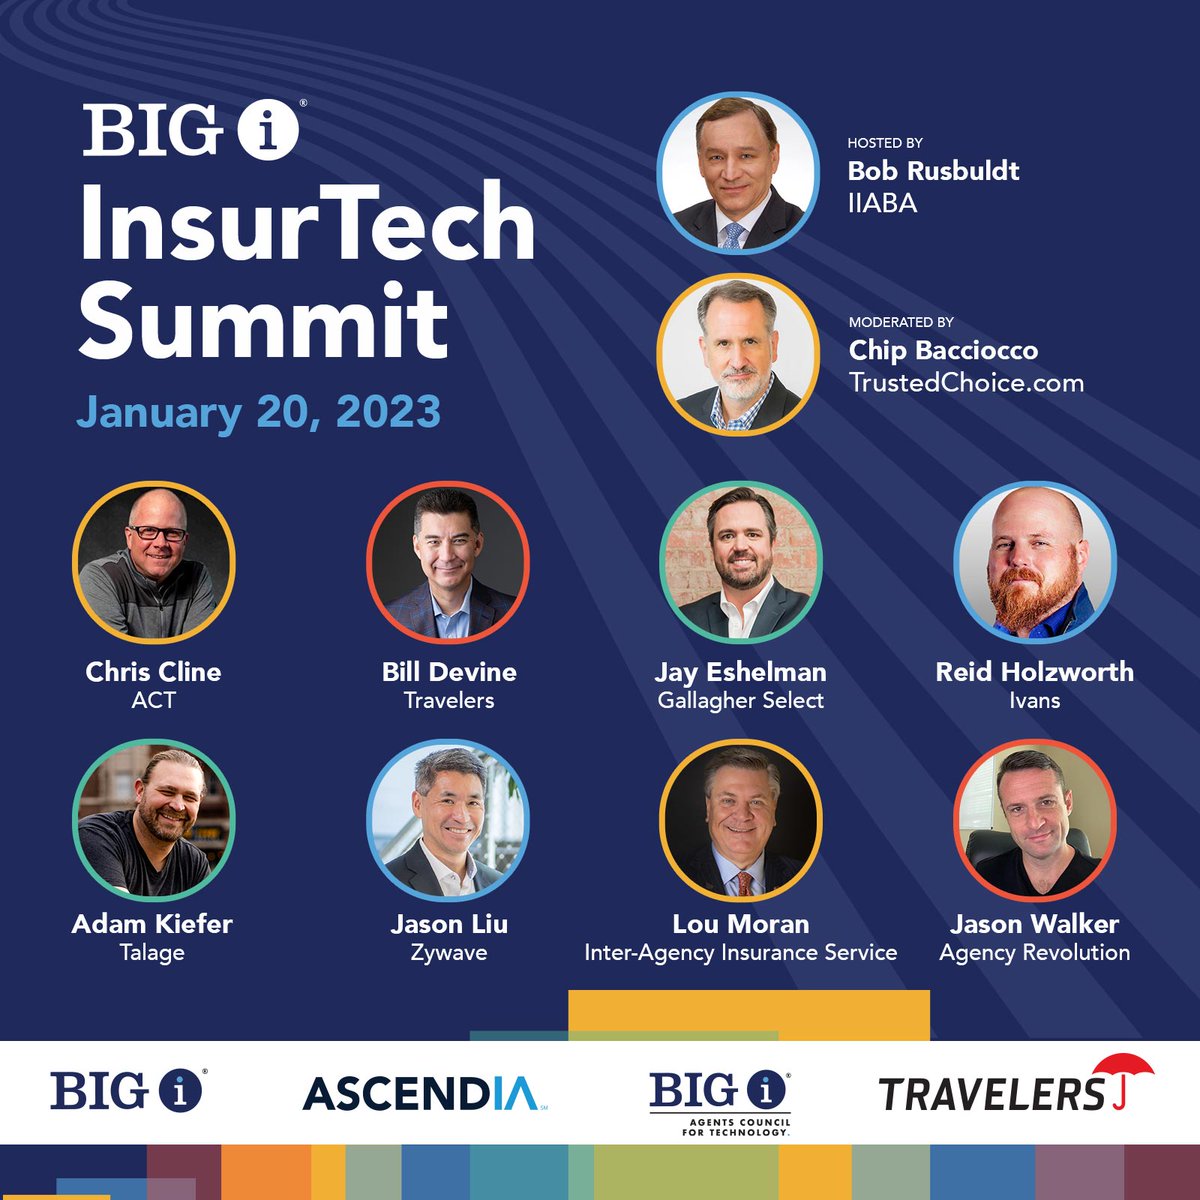 @IndAgent's InsurTech Summit co-presented by @ACT4Agents, Ascendia Ventures, and Diamond Sponsor, @Travelers begins this Friday, Jan 20, at noon in Savannah, GA. Check out the lineup of these #insurtech and #iachannel thought leaders who will be sharing their insight.